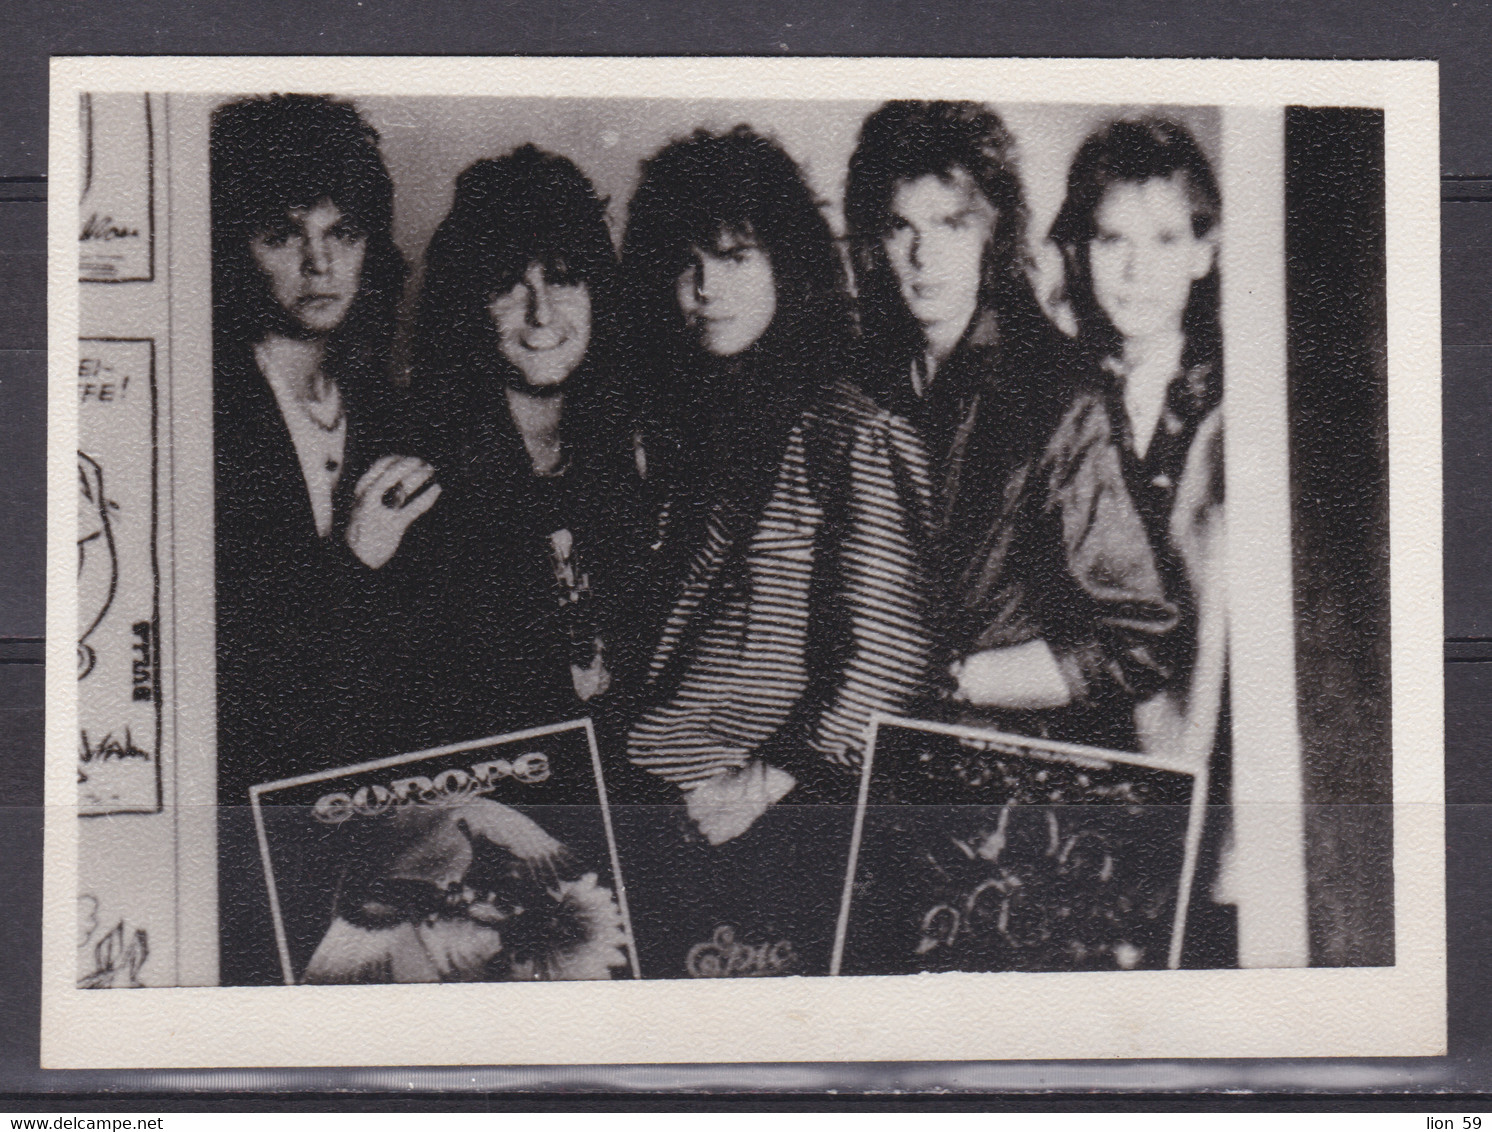 272895 / Europe (band) - Swedish Rock Band Formed In Upplands Väsby, Sweden In 1979, By Frontman Joey Tempest Photo - Photos